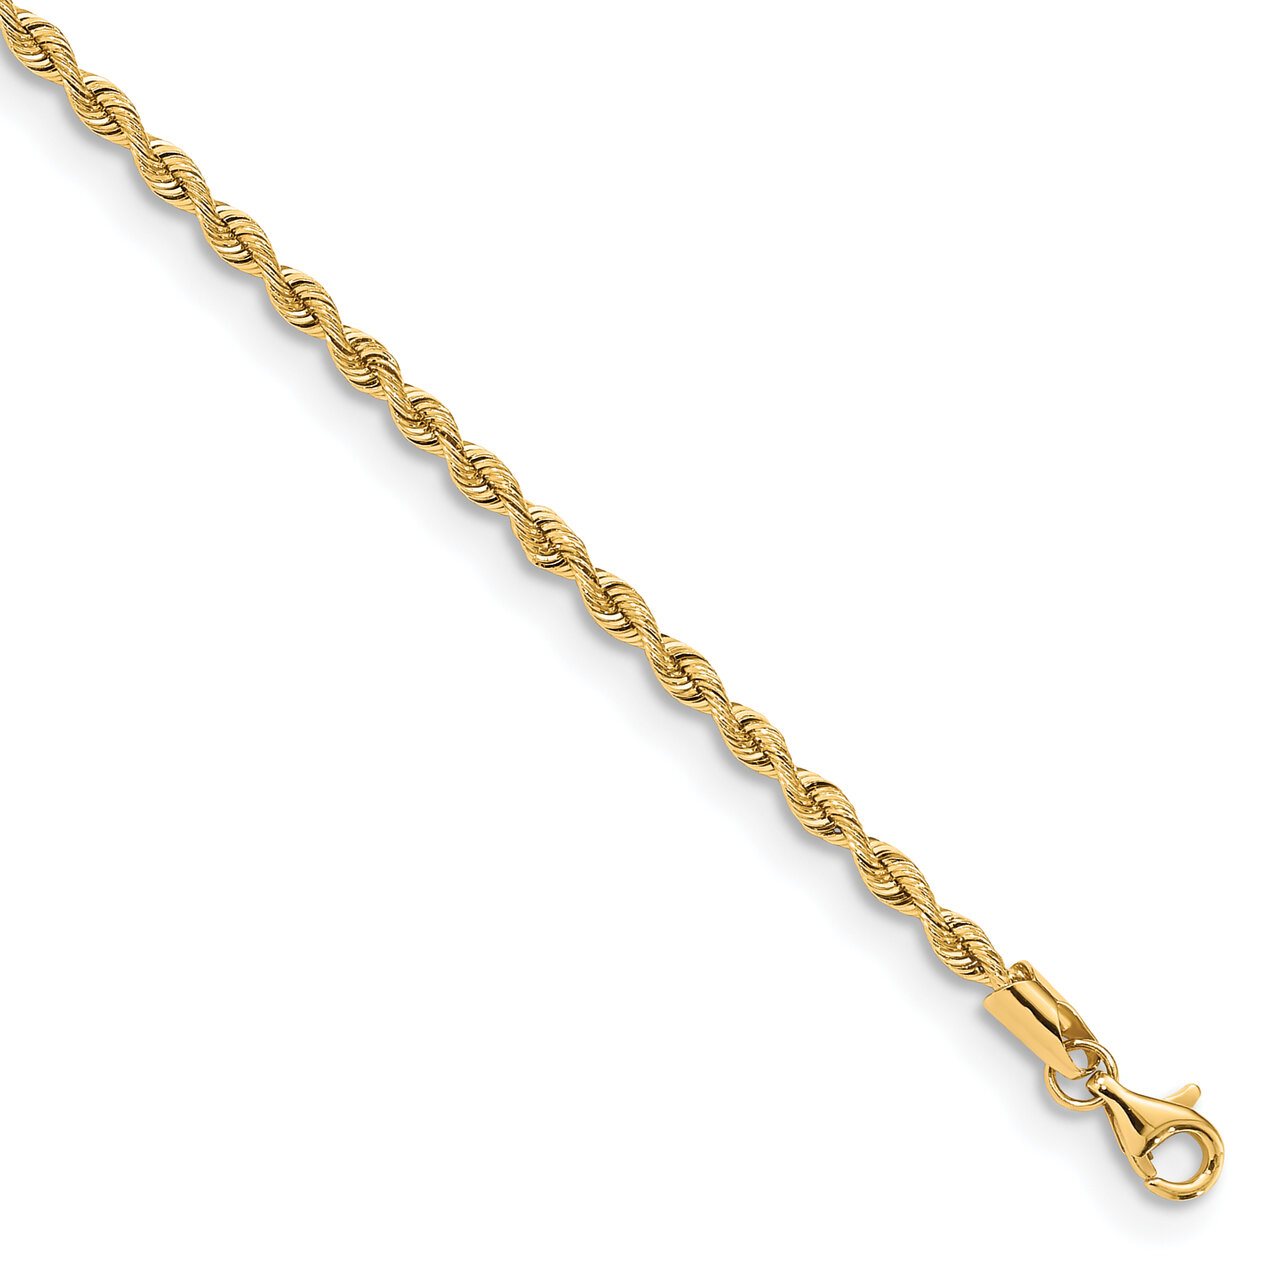 7 Inch 2.55mm Silky Rope Chain 14k Yellow Gold SKR021-7